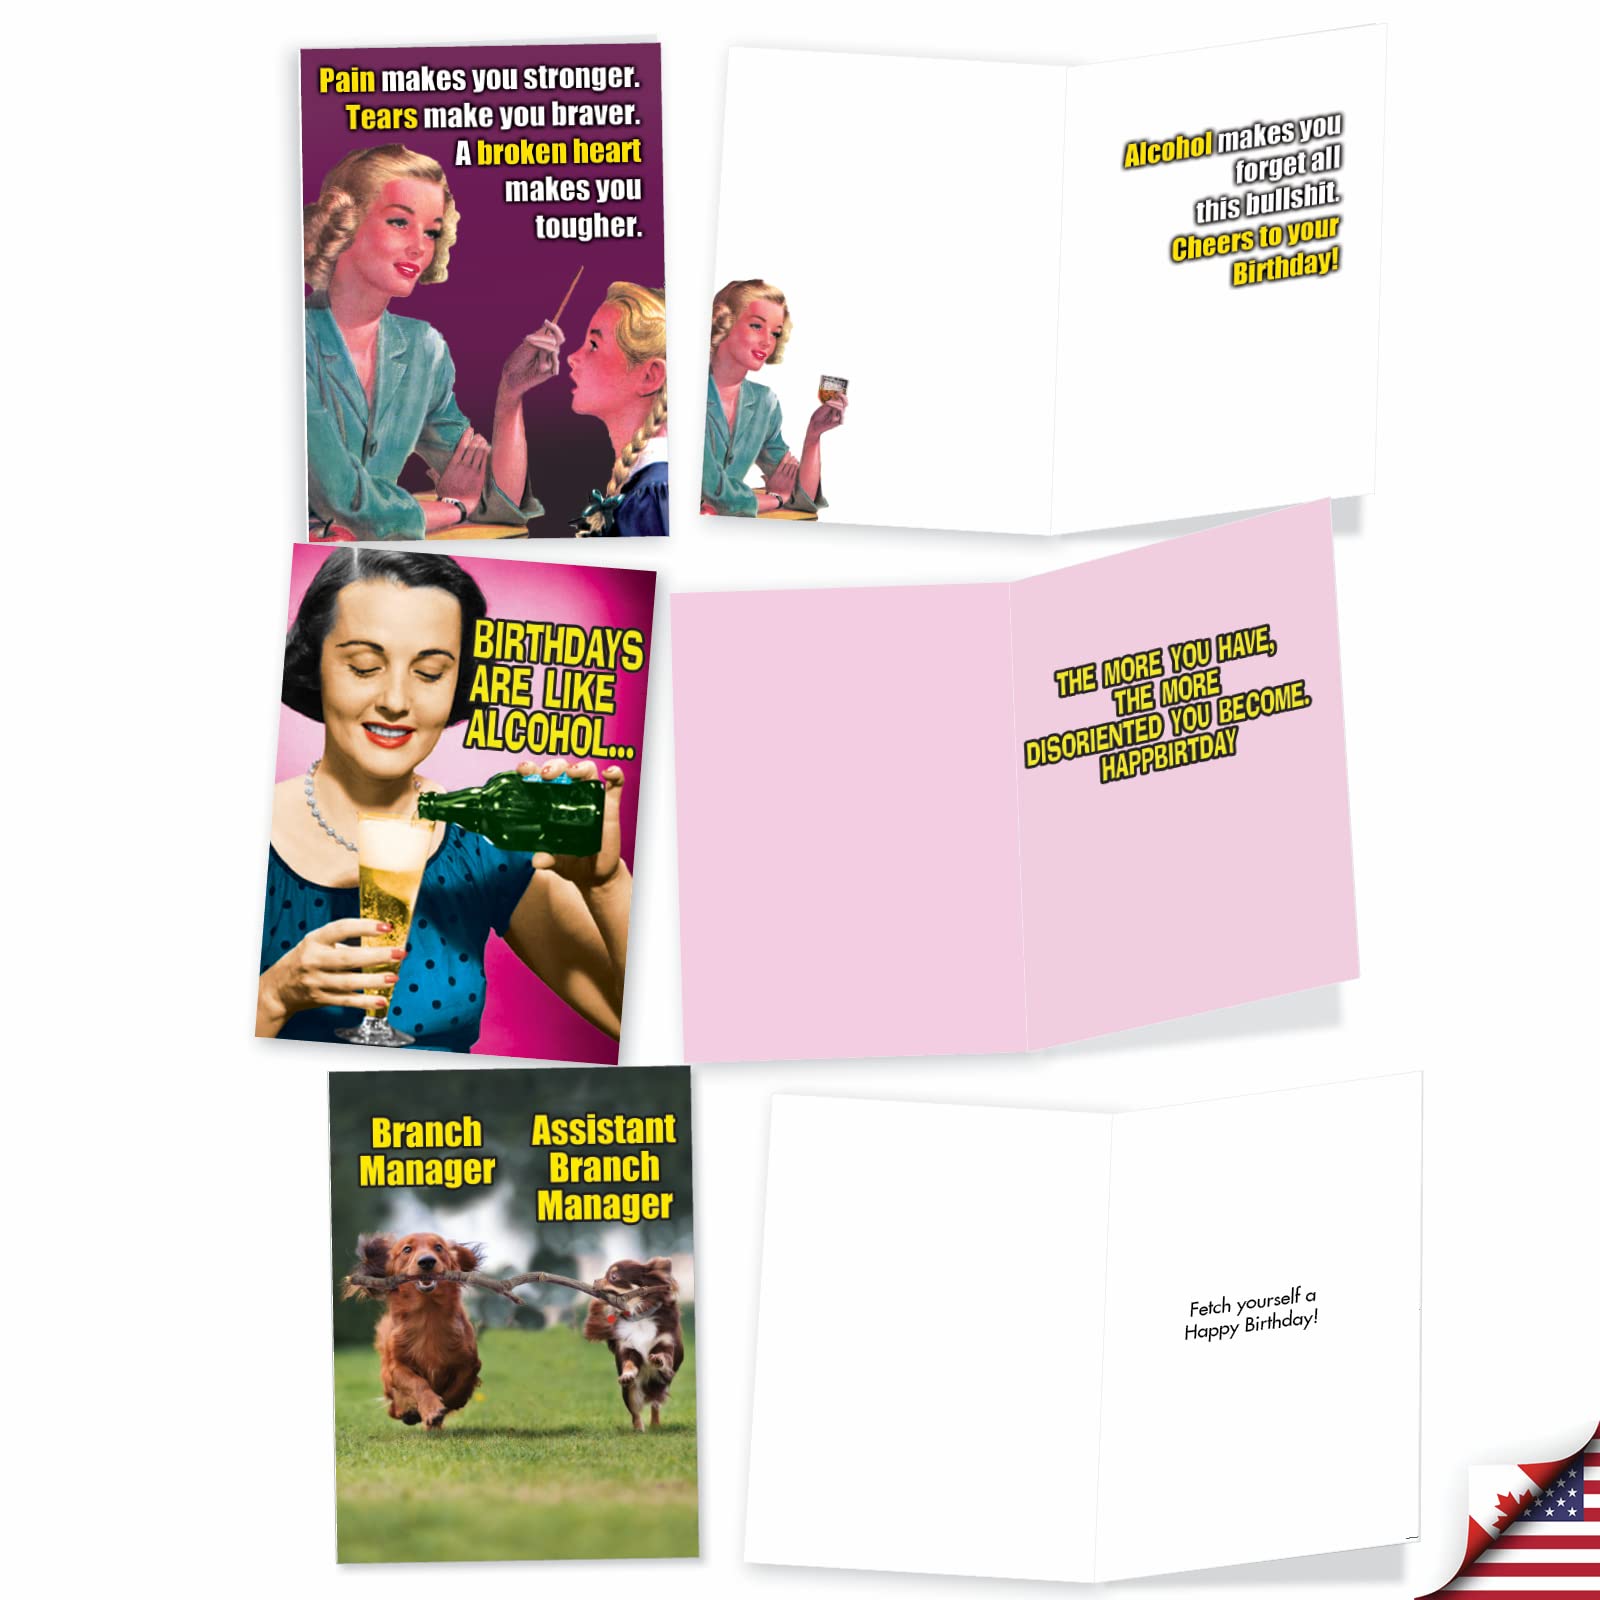 NobleWorks - 10 Funny Birthday Cards Box Set for Men and Women, Assorted Bulk Humor Greeting Cards, Envelopes - A Very Funny Birthday AC5979BDG-B1x10